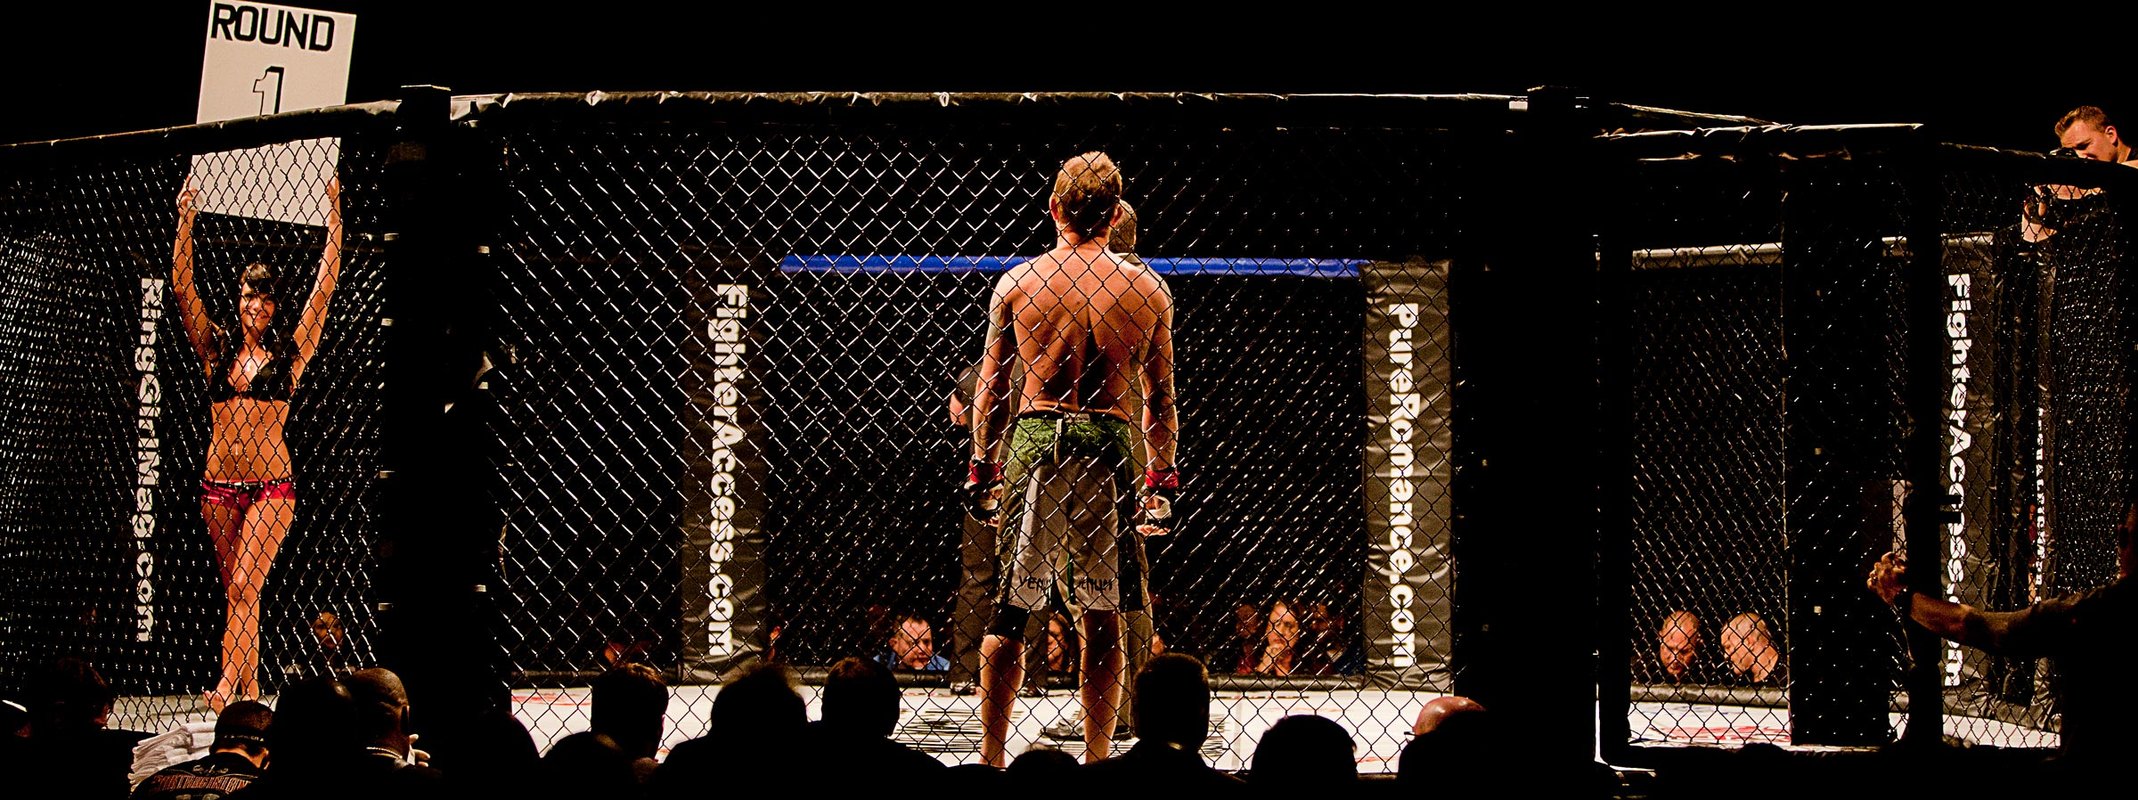 Mixed Martial Arts fighter, Eric Gifford faces off his opponent